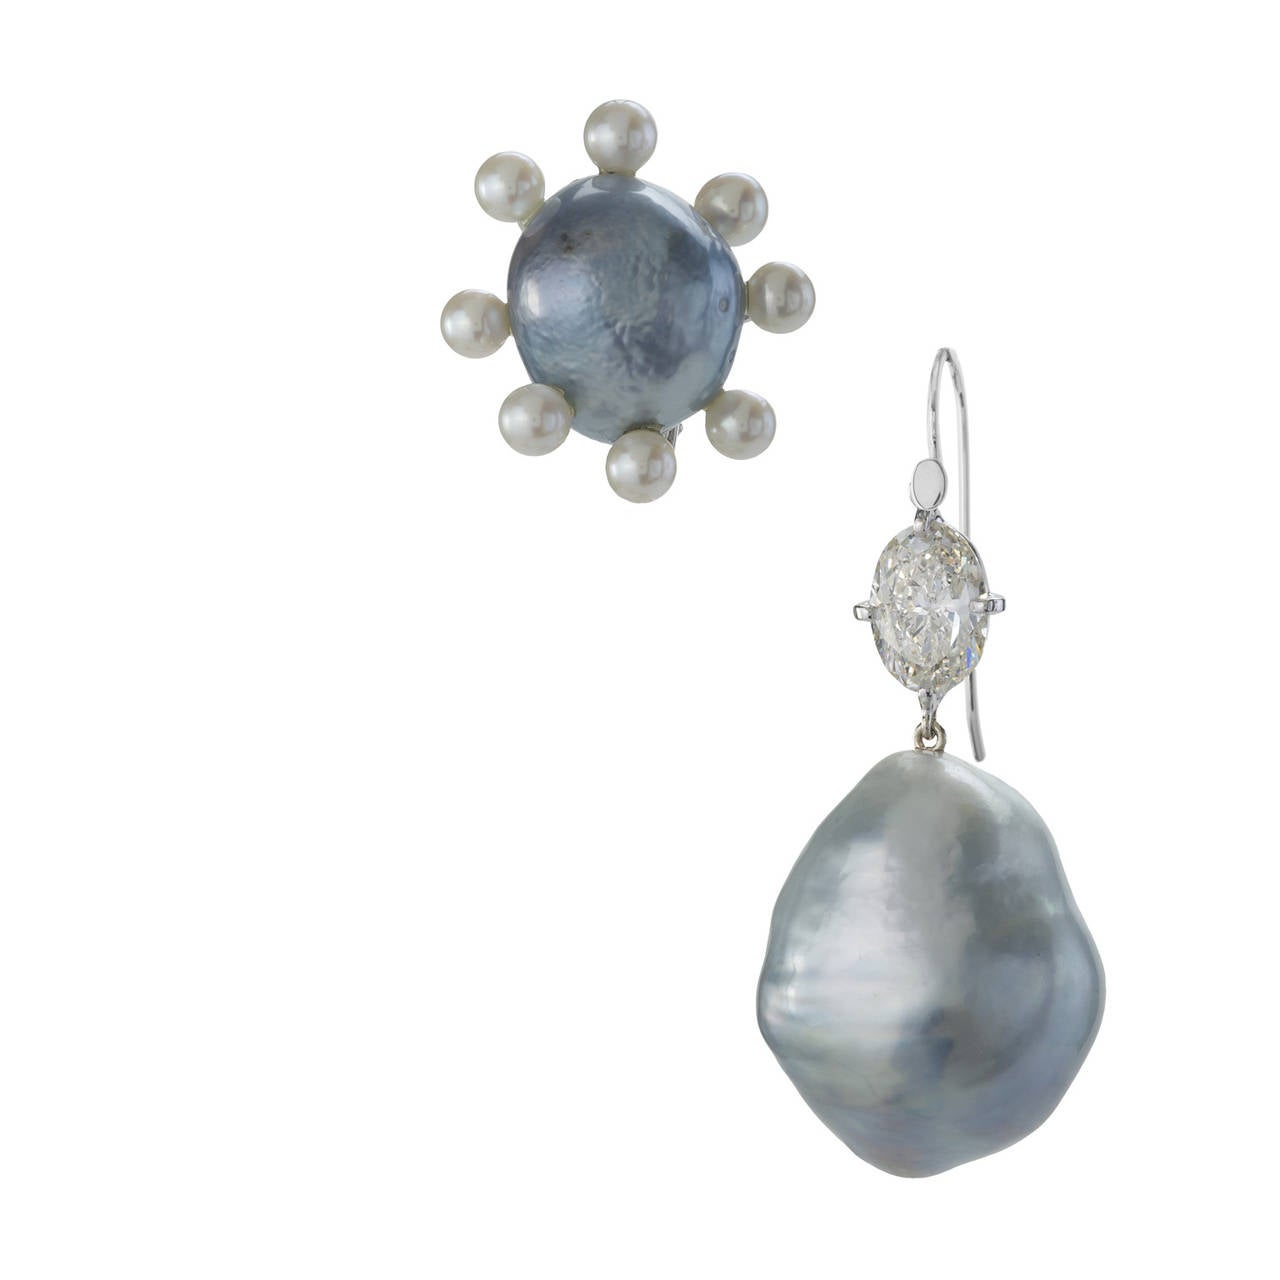 When south sea pearls attain a steely silver luster they are known as “blue” pearls. These elegant earrings feature very large 22mm blue south sea pearl drops and smaller blue south sea pearl clips. The clips are surrounded by white salt-water seed